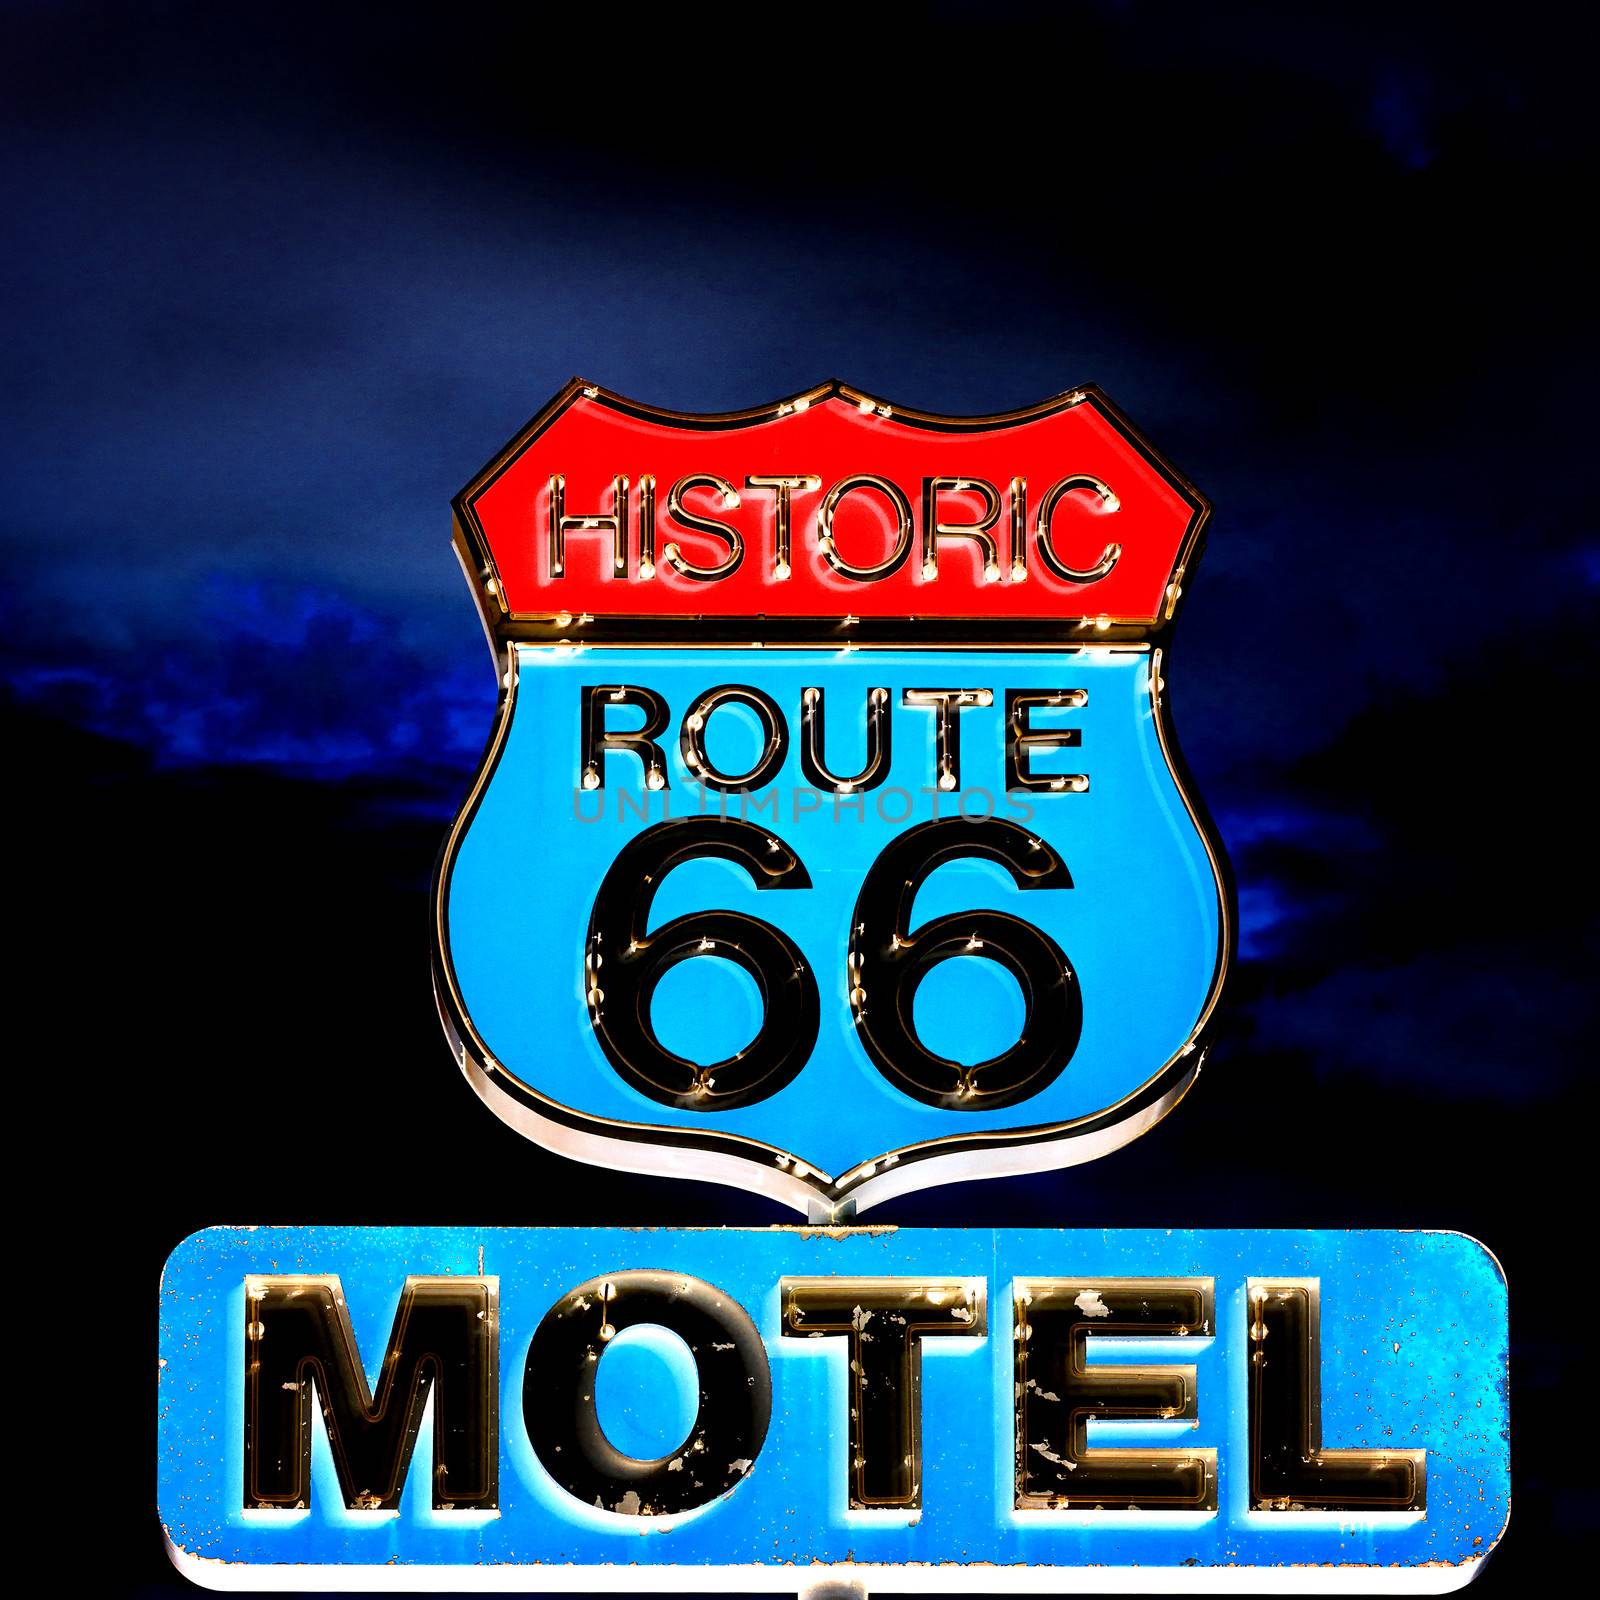 view of famous sign on Route 66 at night, USA 